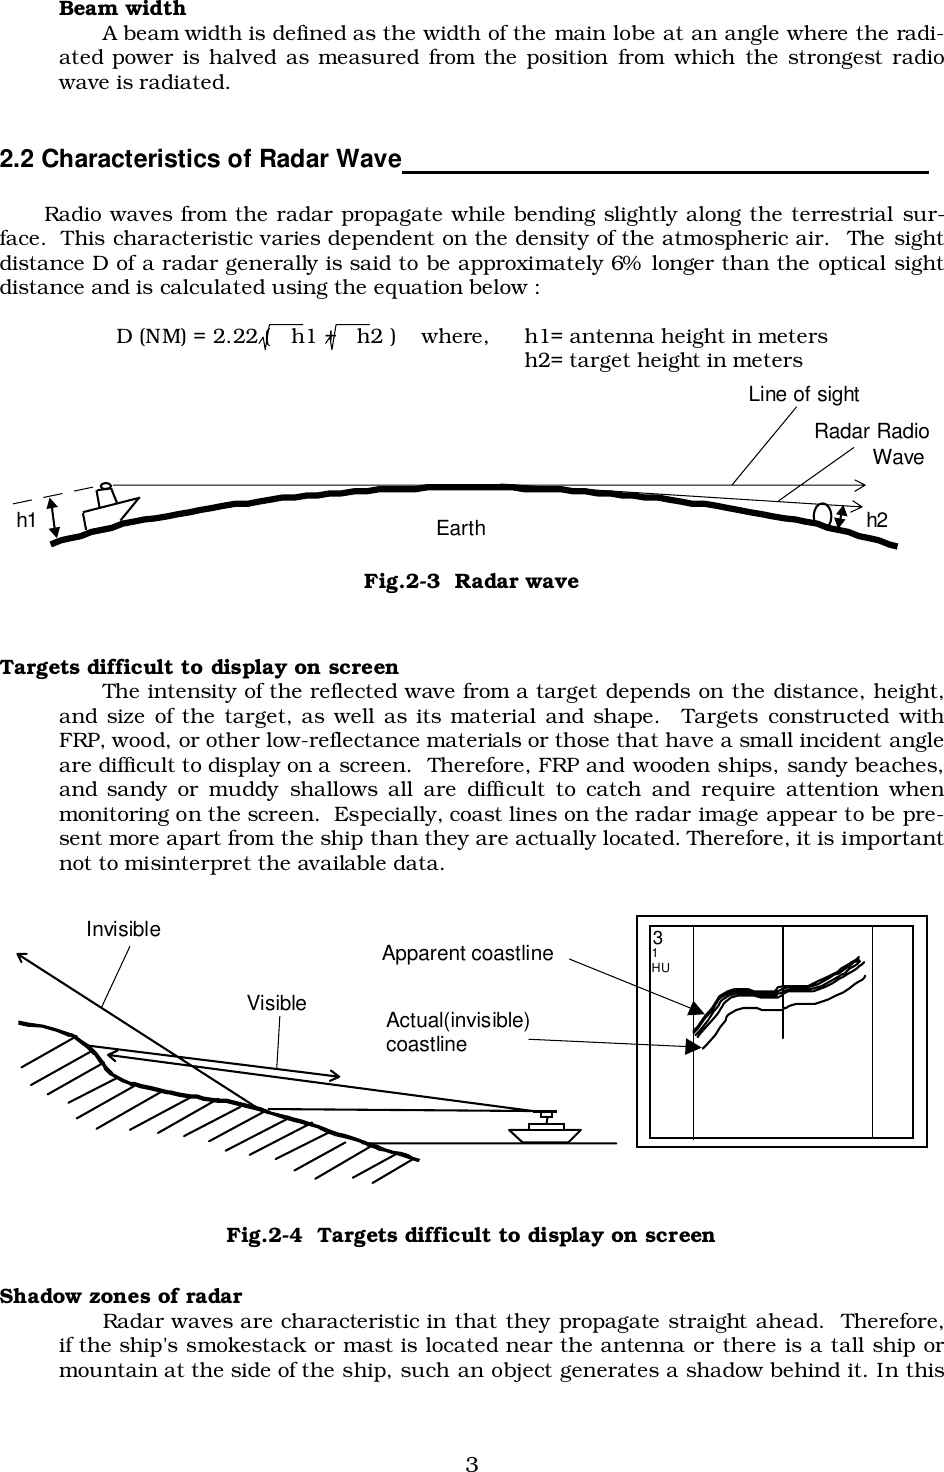 3Beam widthA beam width is defined as the width of the main lobe at an angle where the radi-ated power is halved as measured from the position from which the strongest radiowave is radiated.2.2 Characteristics of Radar Wave                                                                         Radio waves from the radar propagate while bending slightly along the terrestrial sur-face.  This characteristic varies dependent on the density of the atmospheric air.  The sightdistance D of a radar generally is said to be approximately 6%  longer than the optical sightdistance and is calculated using the equation below :     D (NM) = 2.22 (   h1 +   h2 ) where, h1= antenna height in metersh2= target height in metersFig.2-3  Radar waveTargets difficult to display on screenThe intensity of the reflected wave from a target depends on the distance, height,and size of the target, as well as its material and shape.  Targets constructed withFRP, wood, or other low-reflectance materials or those that have a small incident angleare difficult to display on a screen.  Therefore, FRP and wooden ships, sandy beaches,and sandy or muddy shallows all are difficult to catch and require attention whenmonitoring on the screen.  Especially, coast lines on the radar image appear to be pre-sent more apart from the ship than they are actually located. Therefore, it is importantnot to misinterpret the available data.Shadow zones of radarRadar waves are characteristic in that they propagate straight ahead.  Therefore,if the ship&apos;s smokestack or mast is located near the antenna or there is a tall ship ormountain at the side of the ship, such an object generates a shadow behind it. In this Apparent coastline Actual(invisible) coastline Invisible Visible 3 1  HU Fig.2-4  Targets difficult to display on screenh1 h2Line of sightRadar Radio          WaveEarth